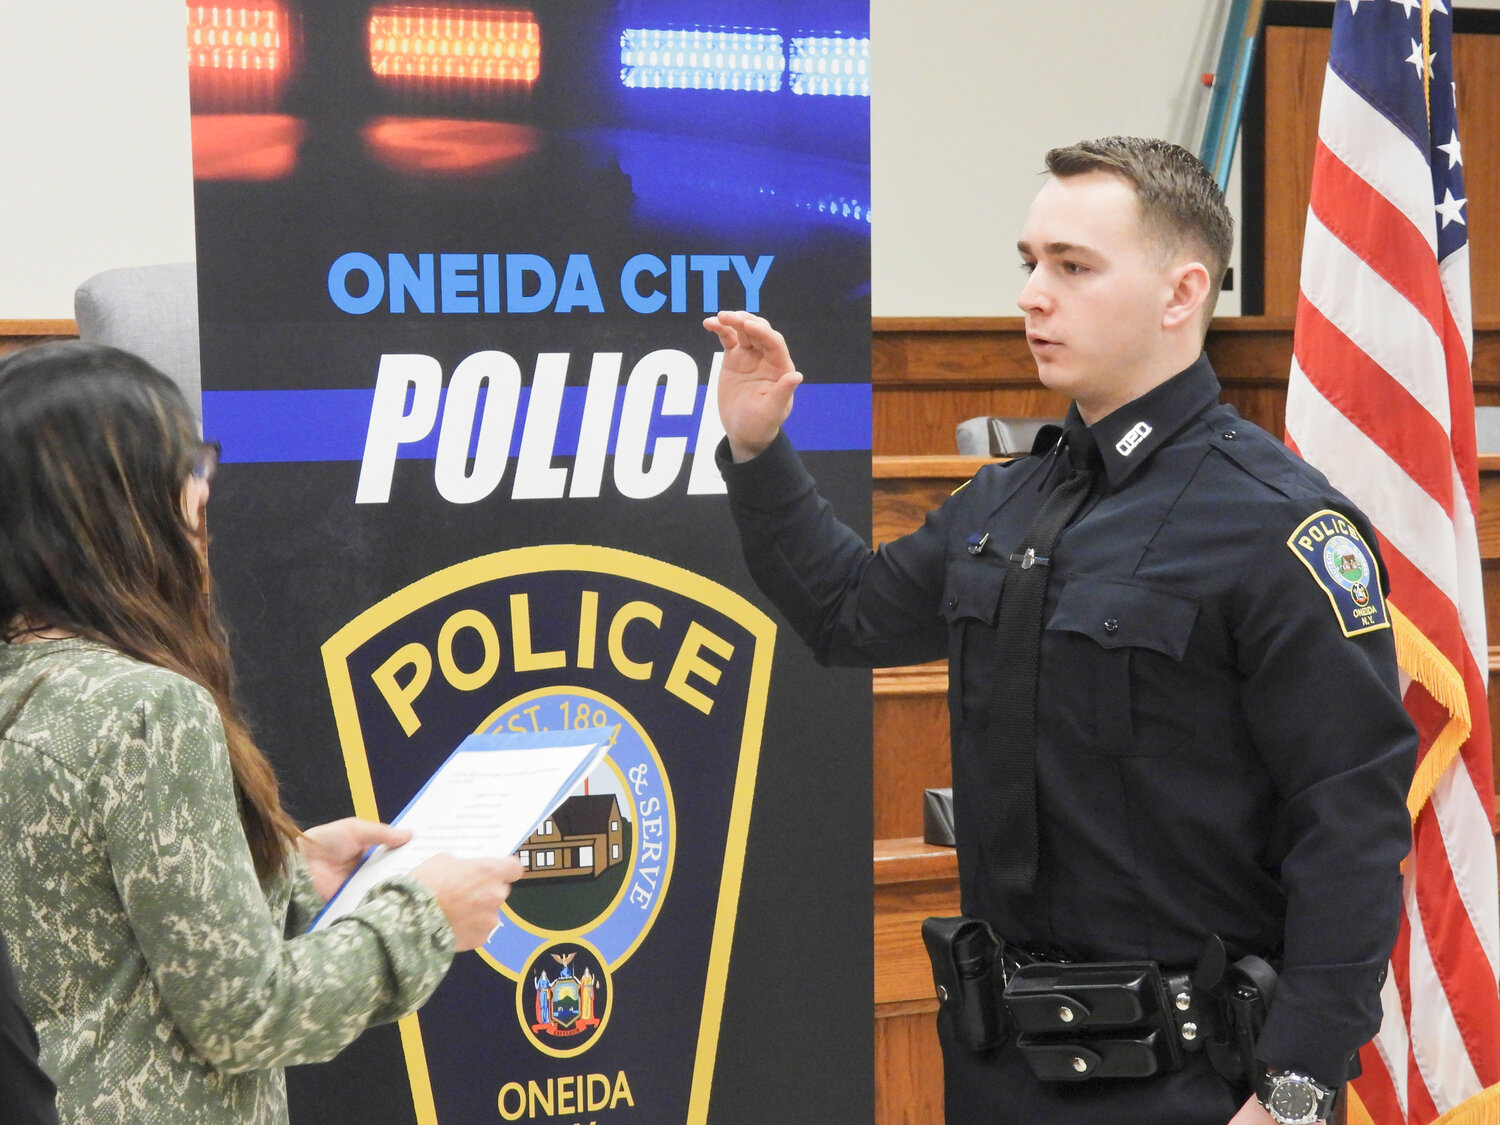 Officer Nicholas Weber takes takes his oath at a swearing-in ceremony in the Oneida Common Council on Thursday, March 9. Weber is currently enlisted in the Army National Guard and serves as a sergeant with the 2nd Squadron 101st Cavalry Regiment. He is currently leading the department in DWI arrest and is pursuing advanced training to become a Field Training Officer